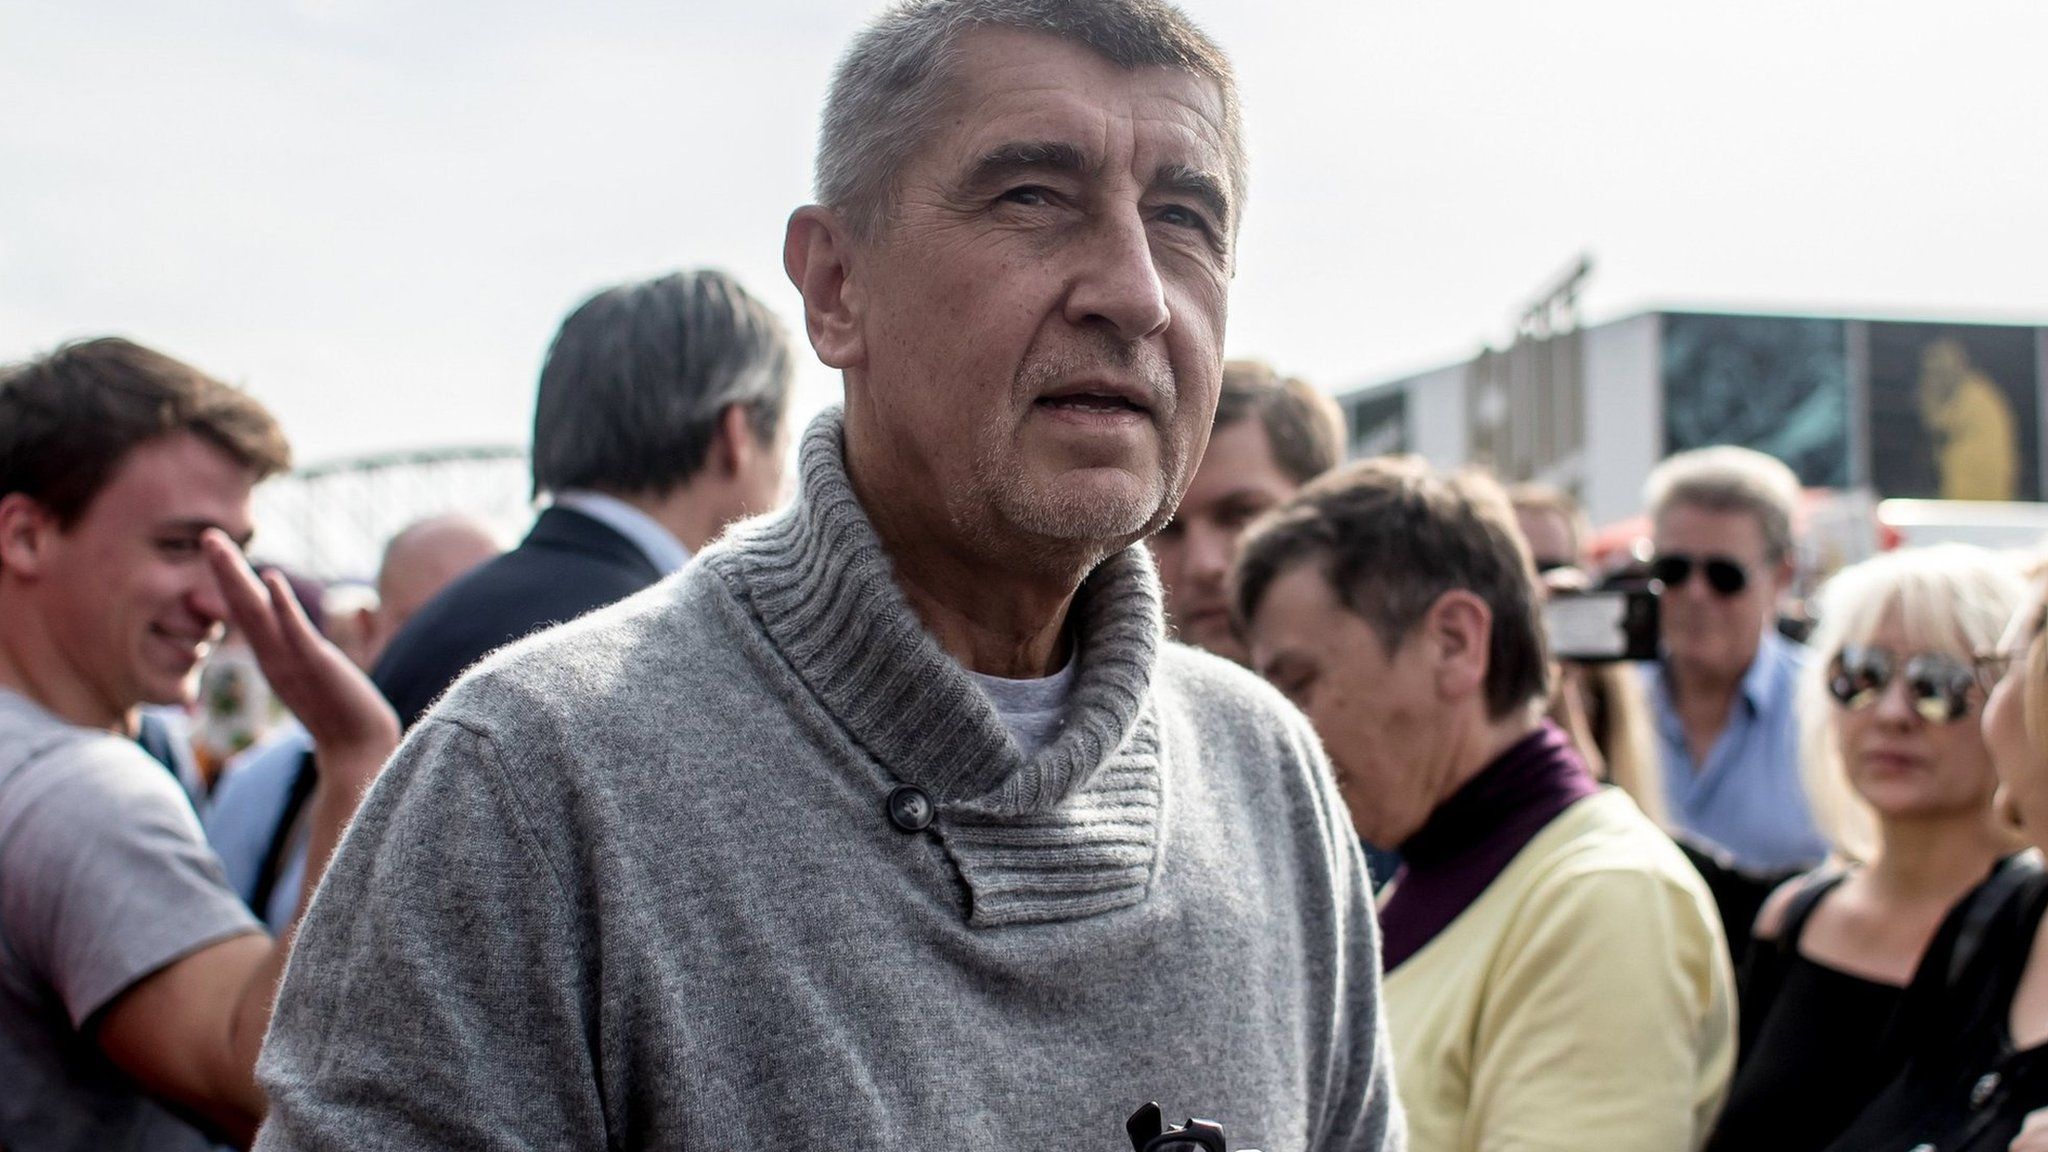 Andrej Babis meets with his supporters during an election campaign rally in Prague